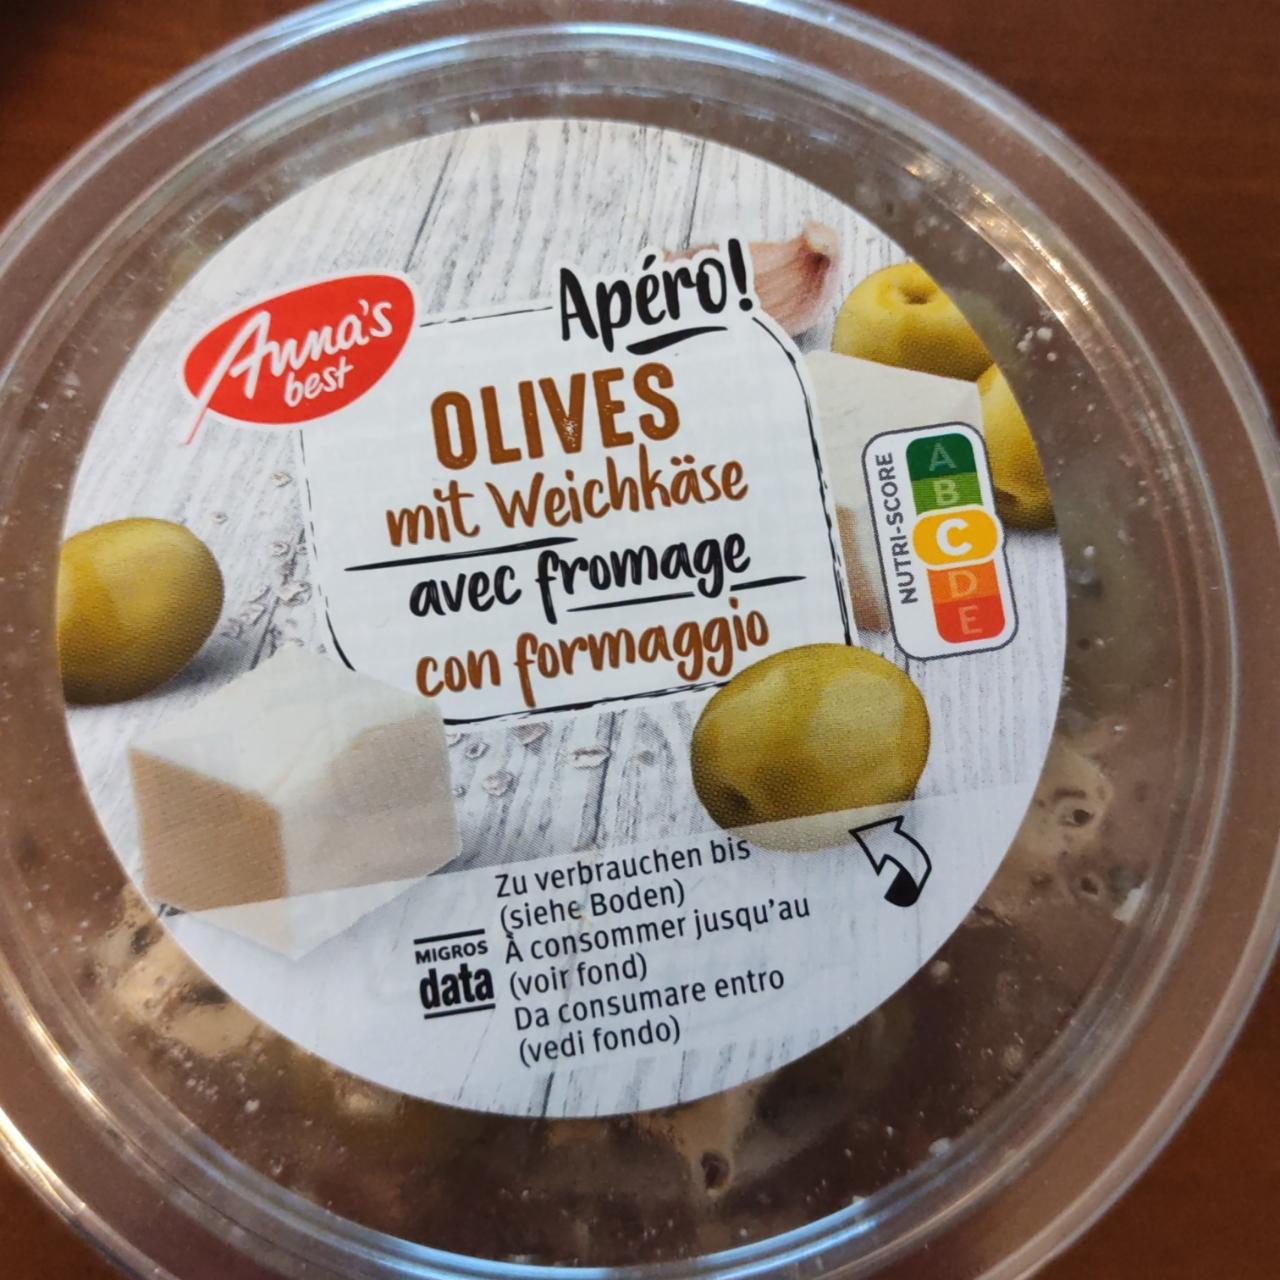 Фото - Olives avec fromage Apéro! Anna's best Migros